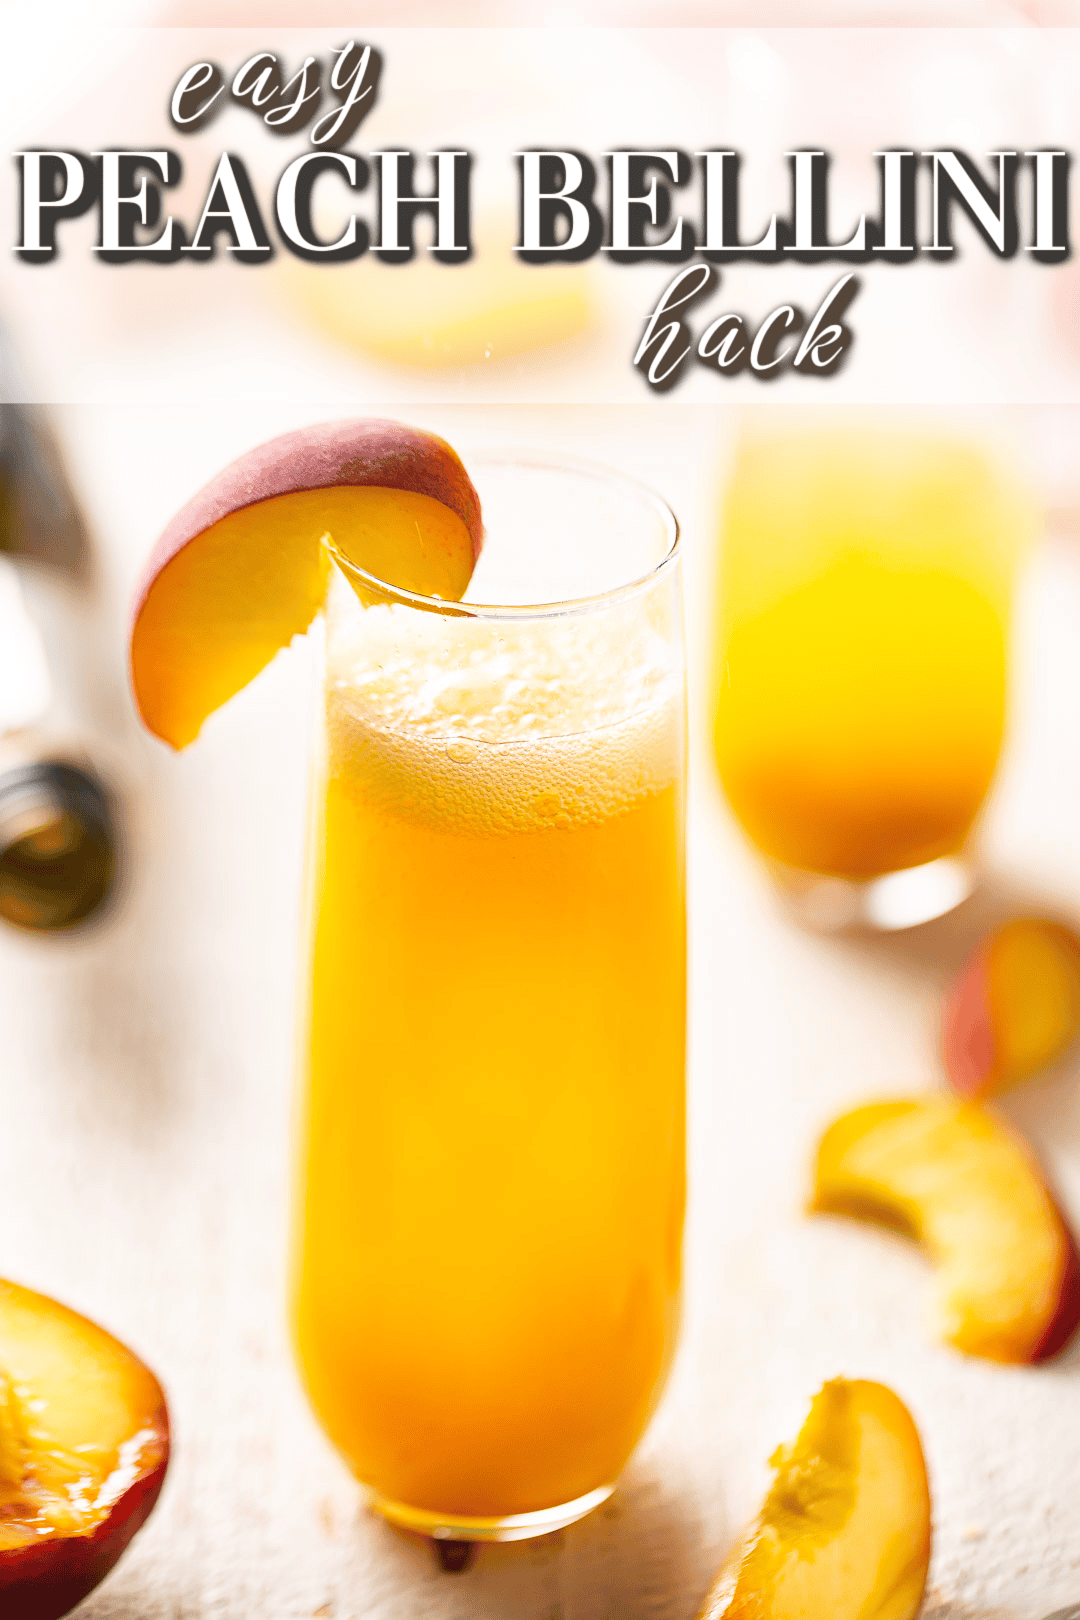 Peach Bellini surrounded by fresh peaches.